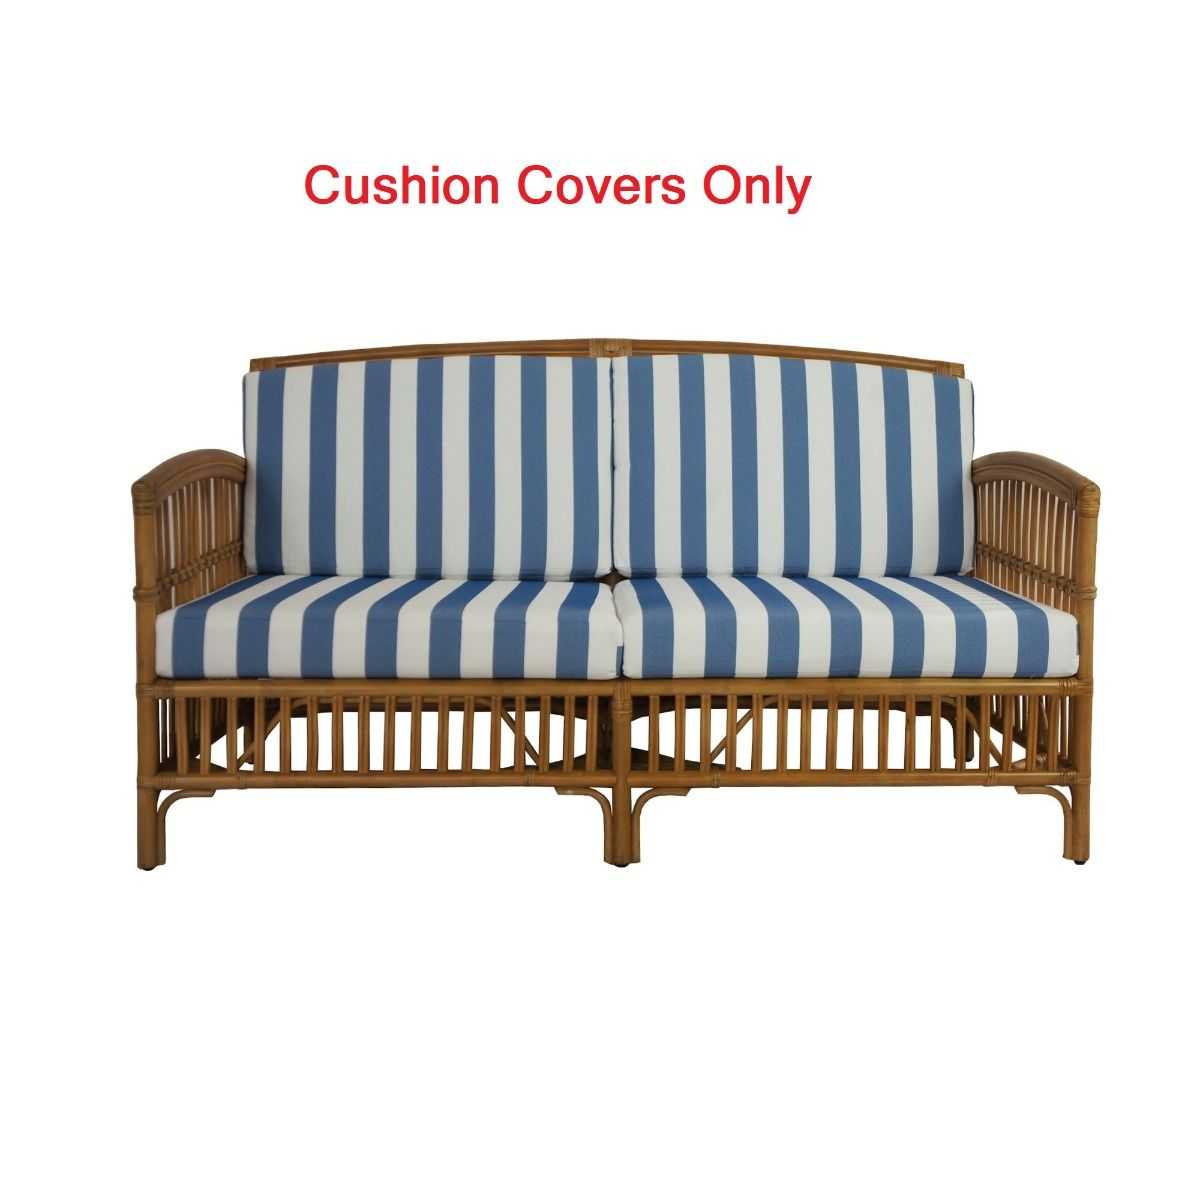 CR Outdoor Cushion Cover for N-0273 Americana 2.5 Seater